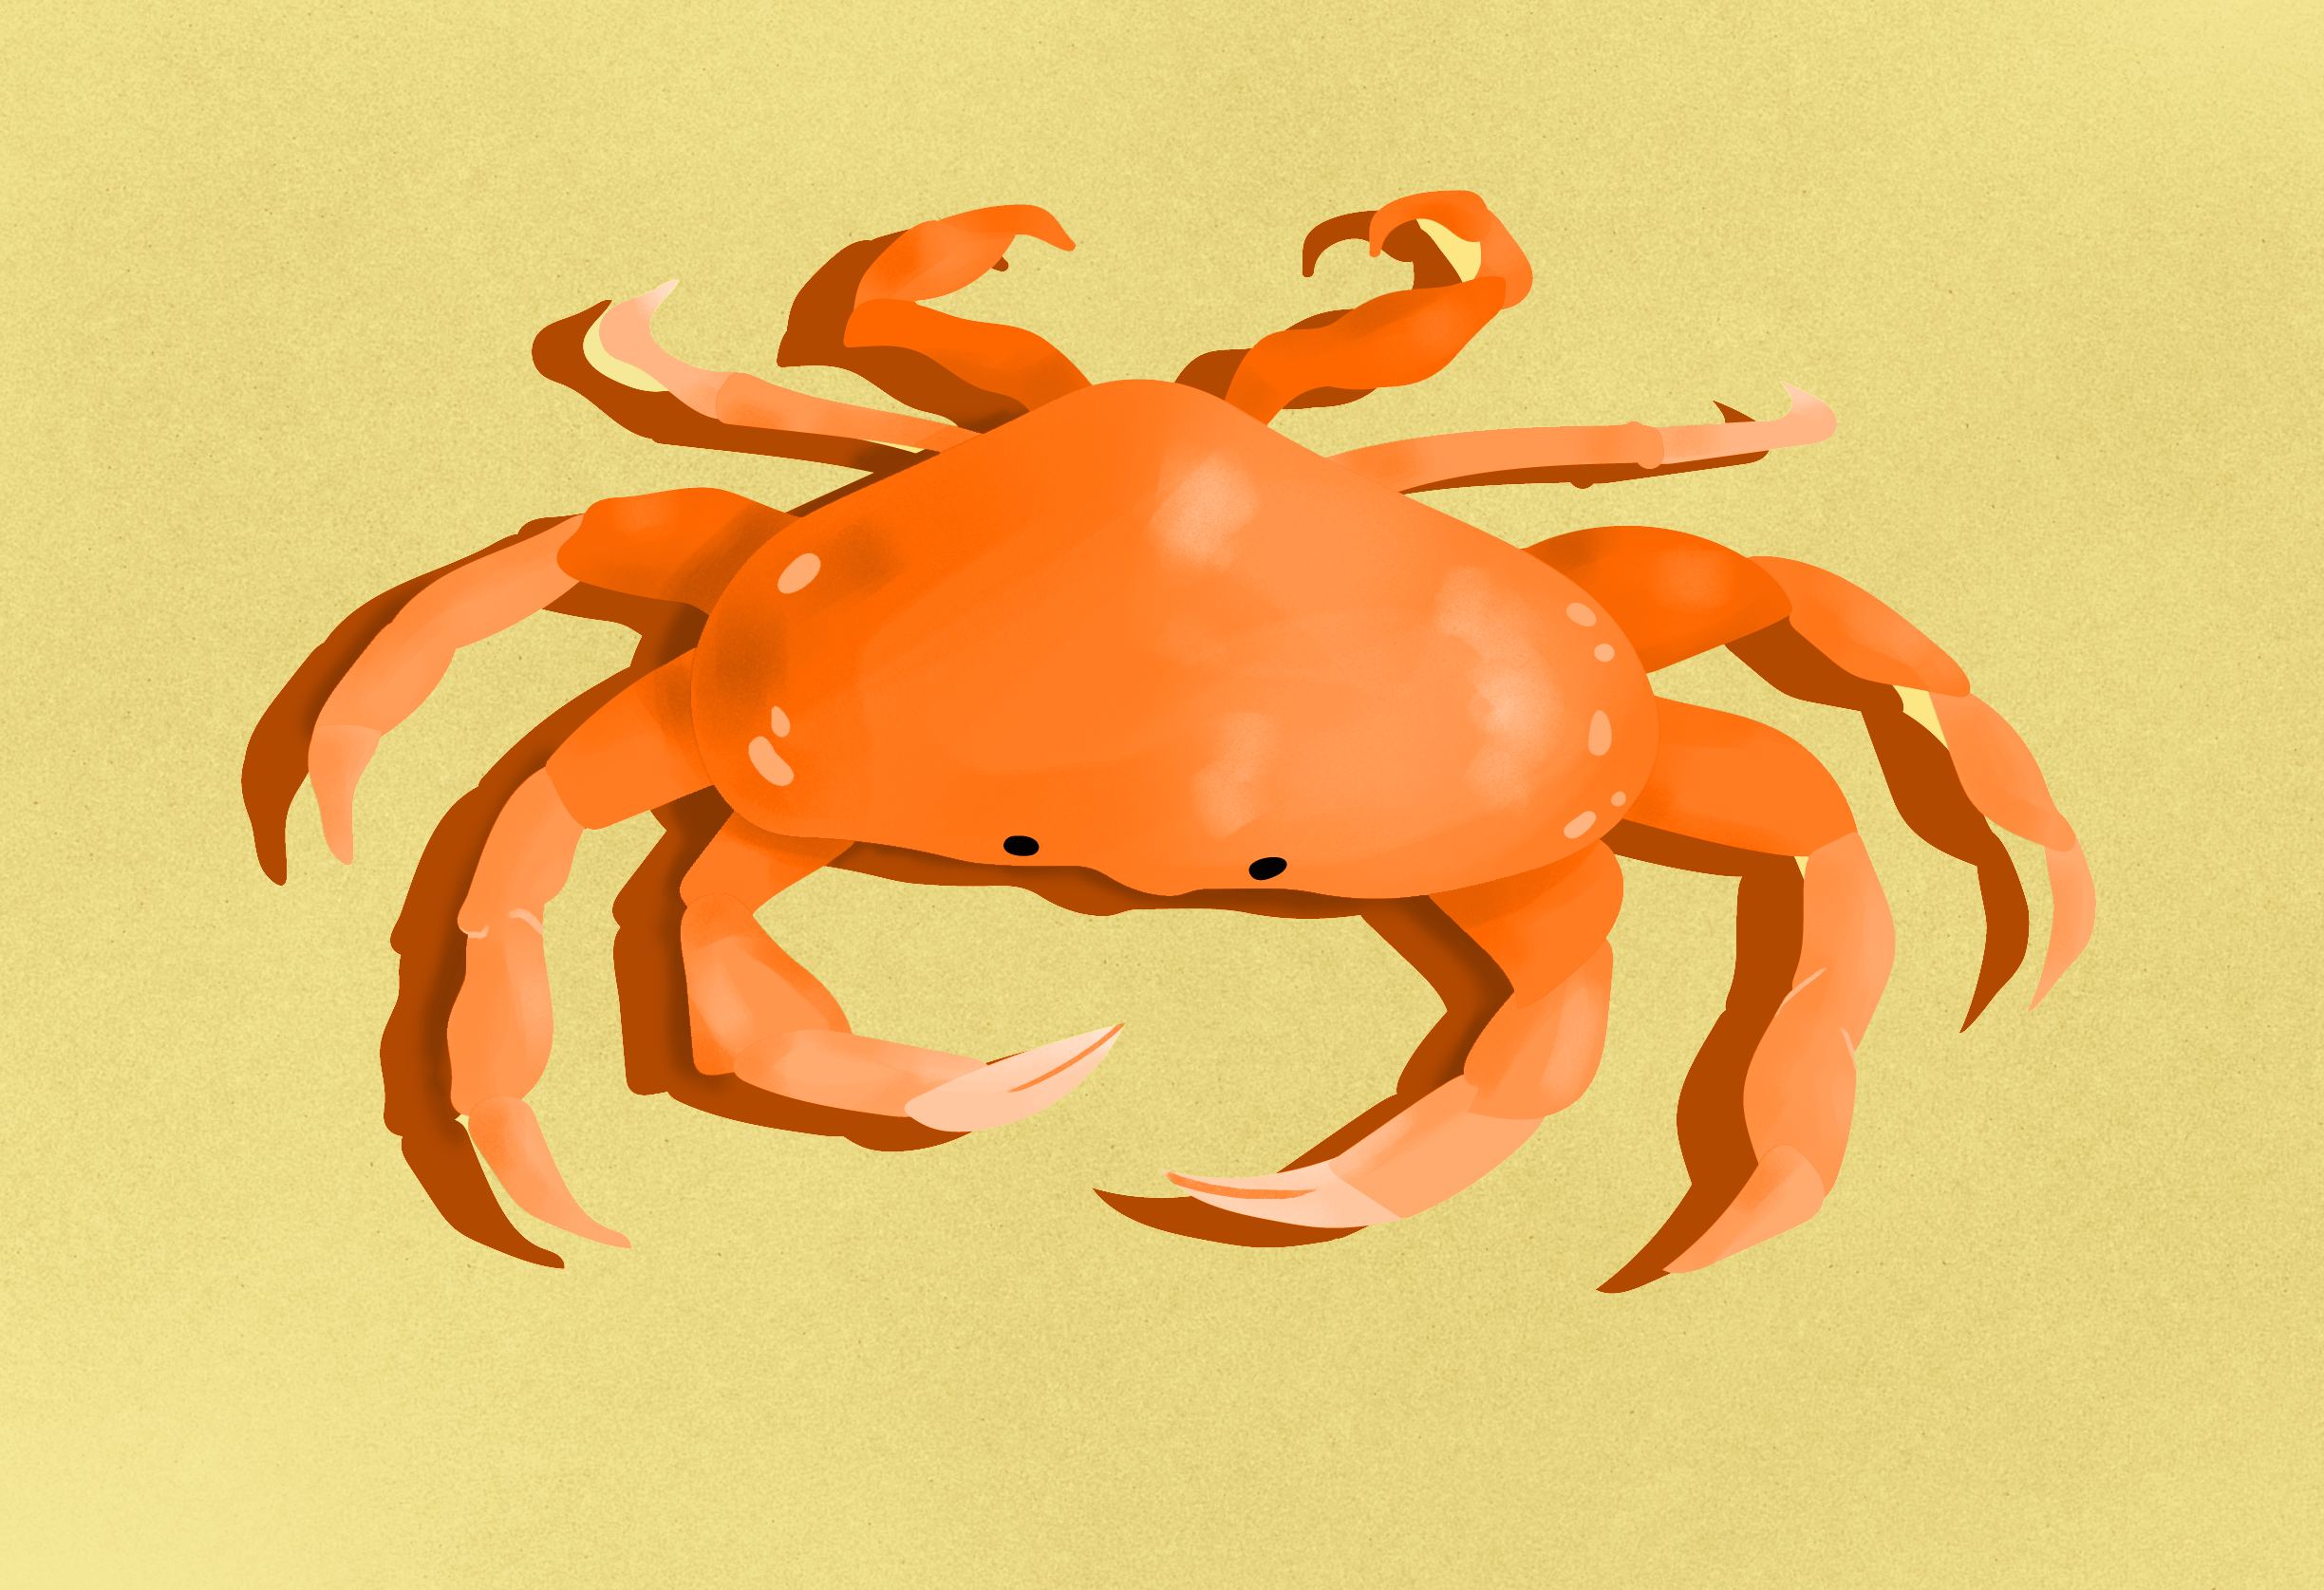 Mr Crab on a scorching hot beach